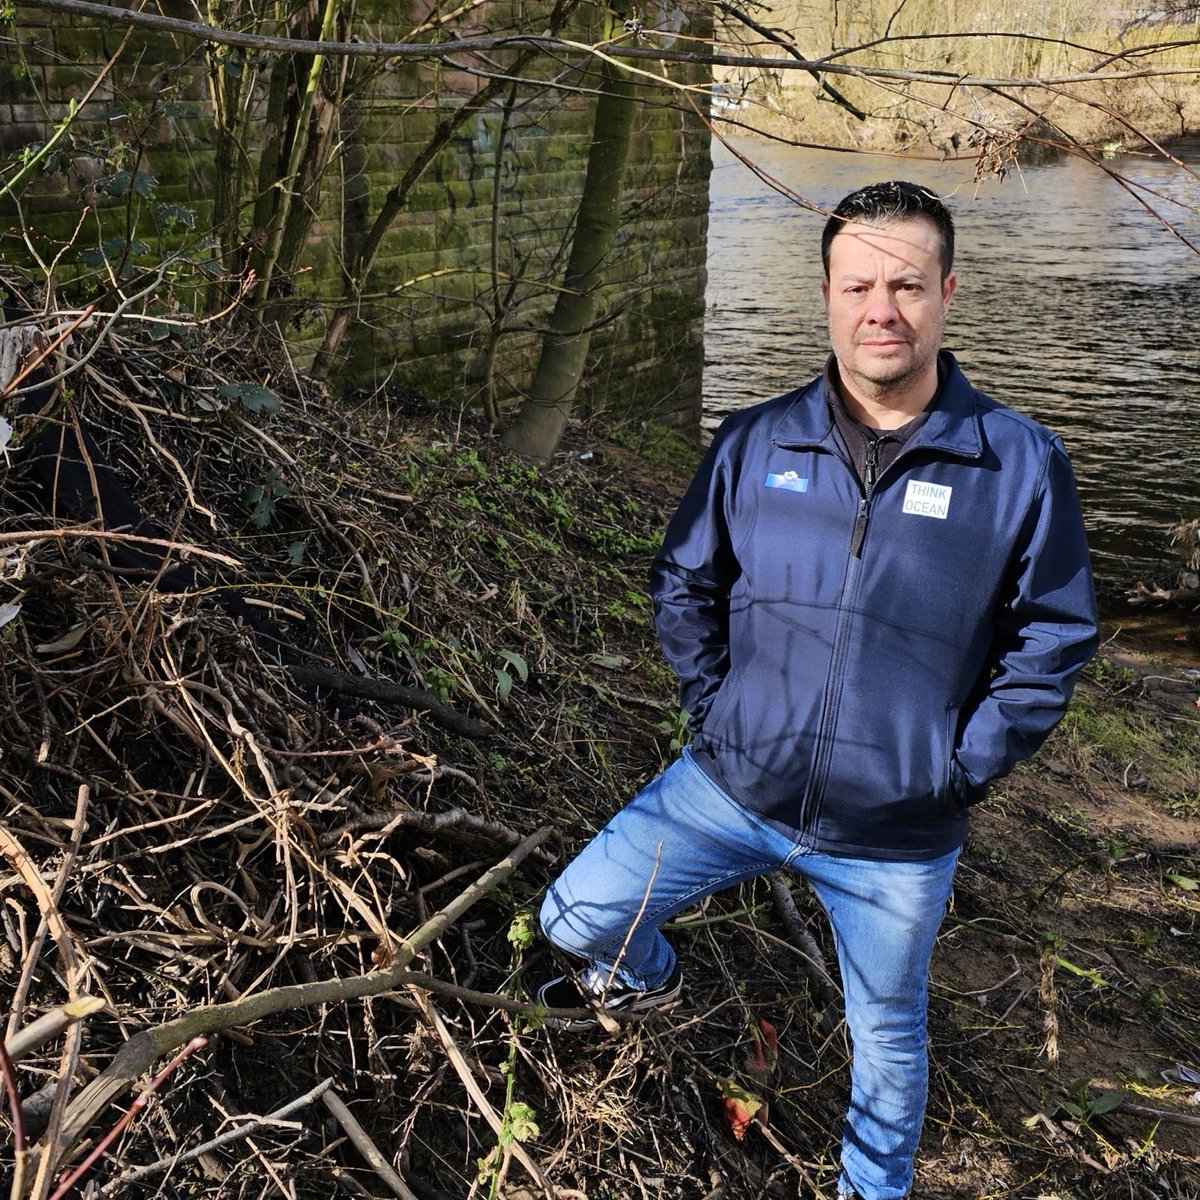 The plastic rubbish left in the River Derwent is an eyesore - so city environmental group Think Ocean is joining forces with @DerbyUni and @derbycollege to tidy it up in the first Bio Derby Clean Up, taking place on Wednesday. Read more at bit.ly/3wOSl0t